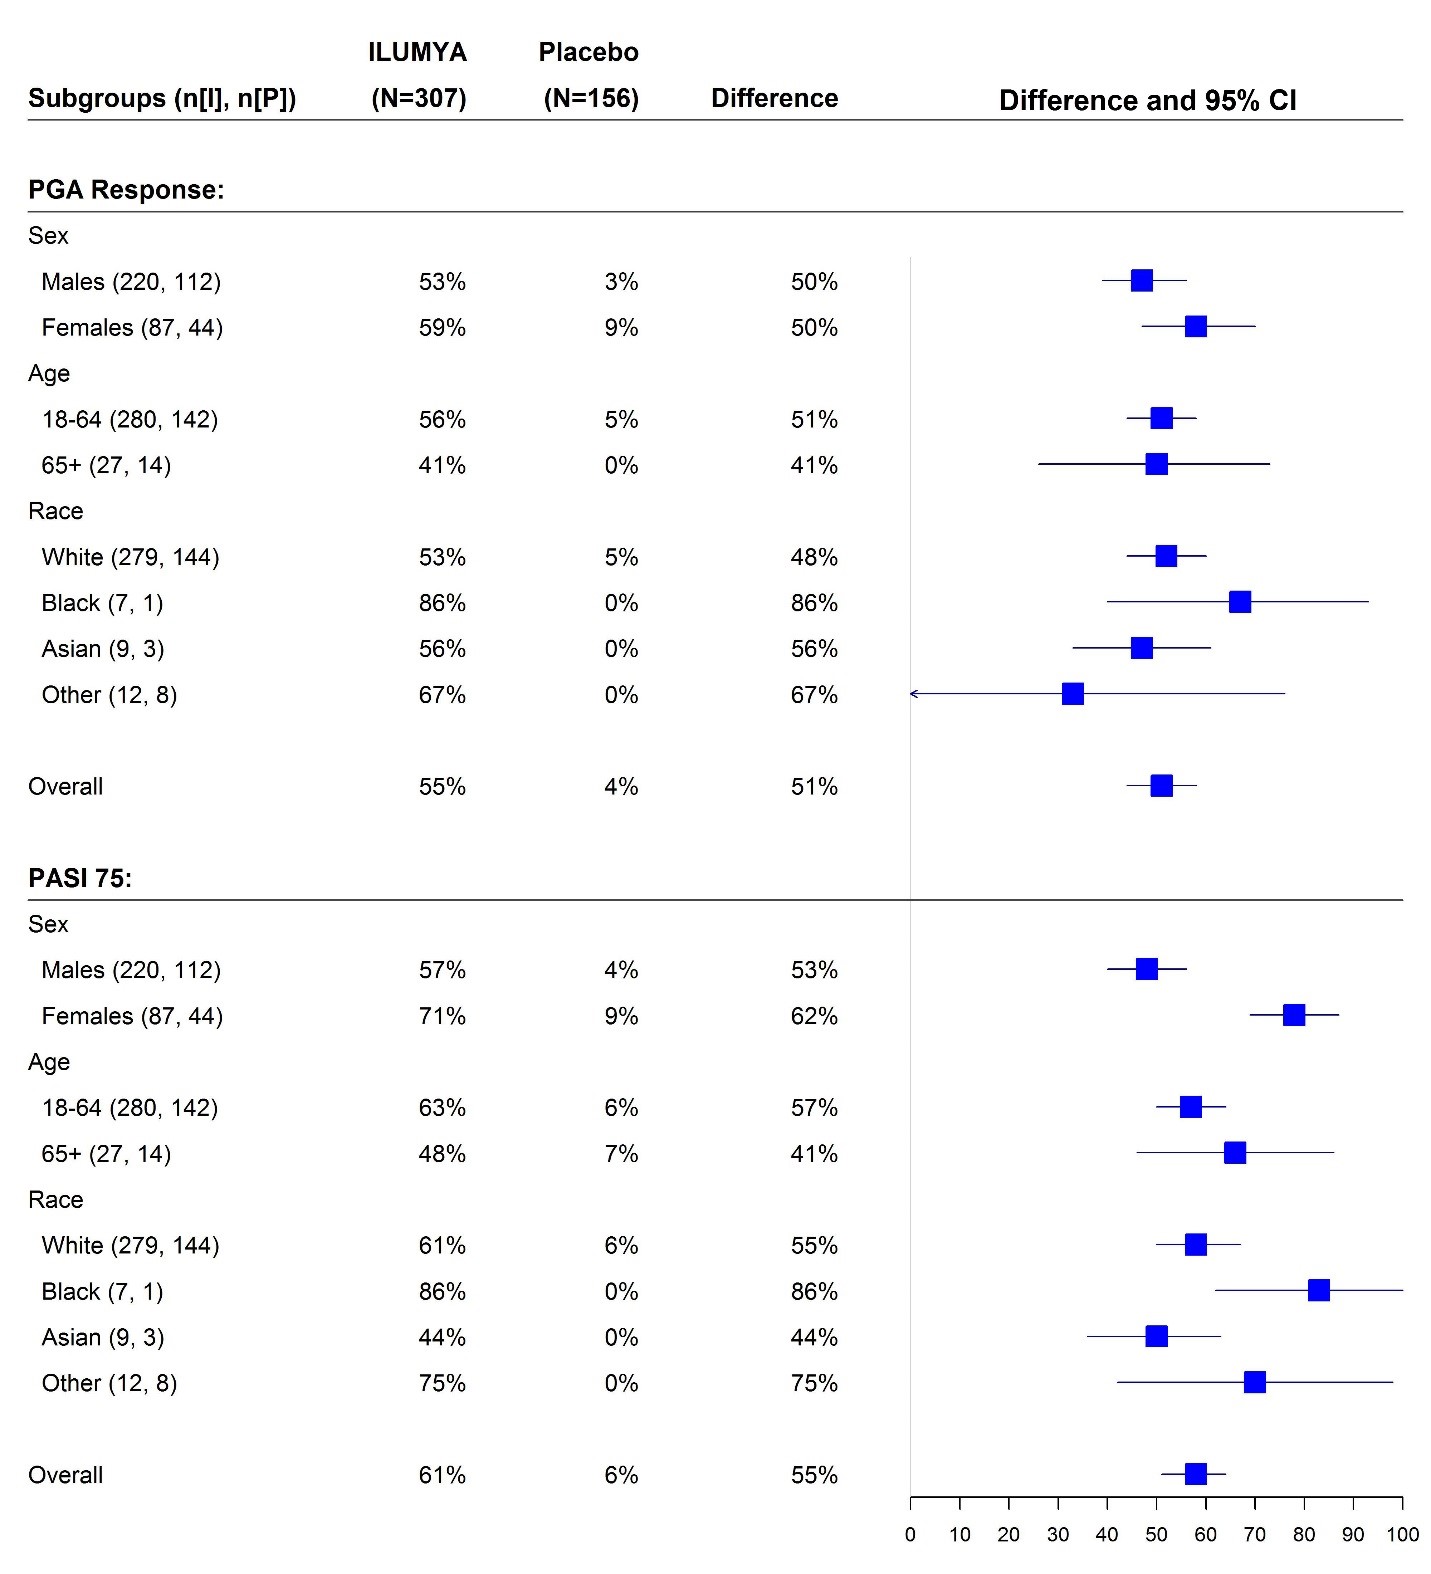 Table summarizes efficacy results from Trial 3 by subgroups.